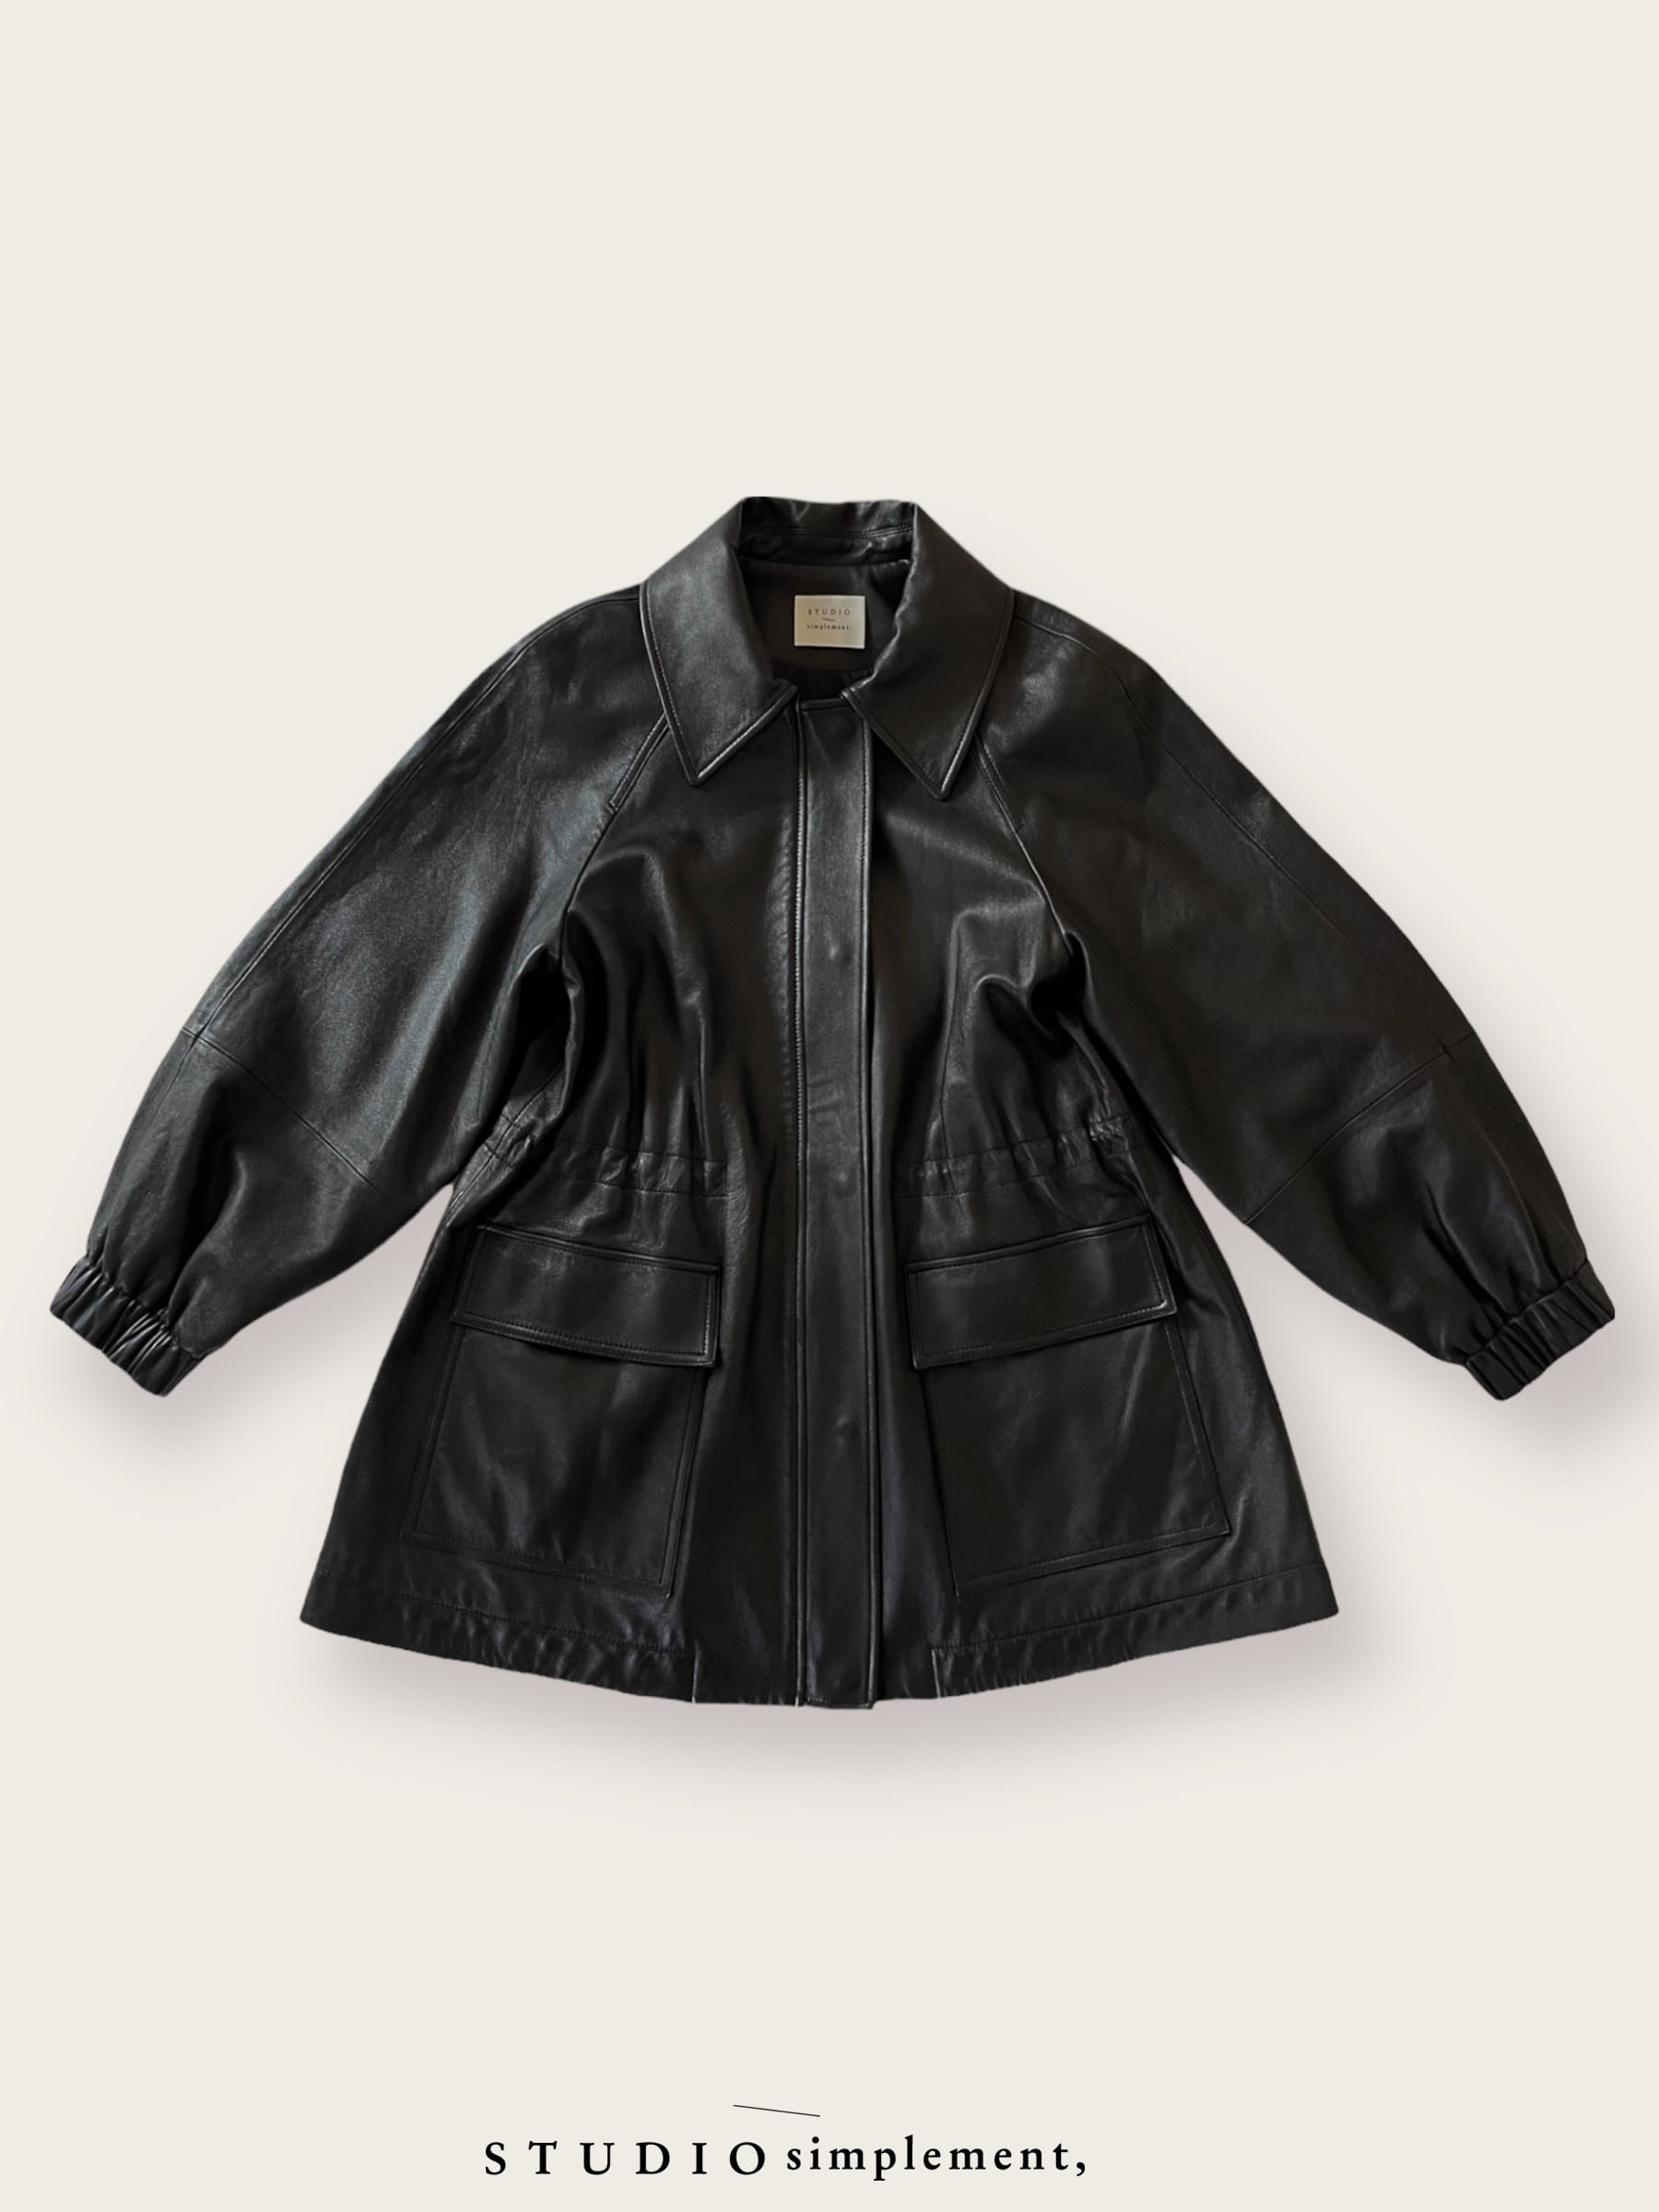 5th/ Londres Leather Jacket